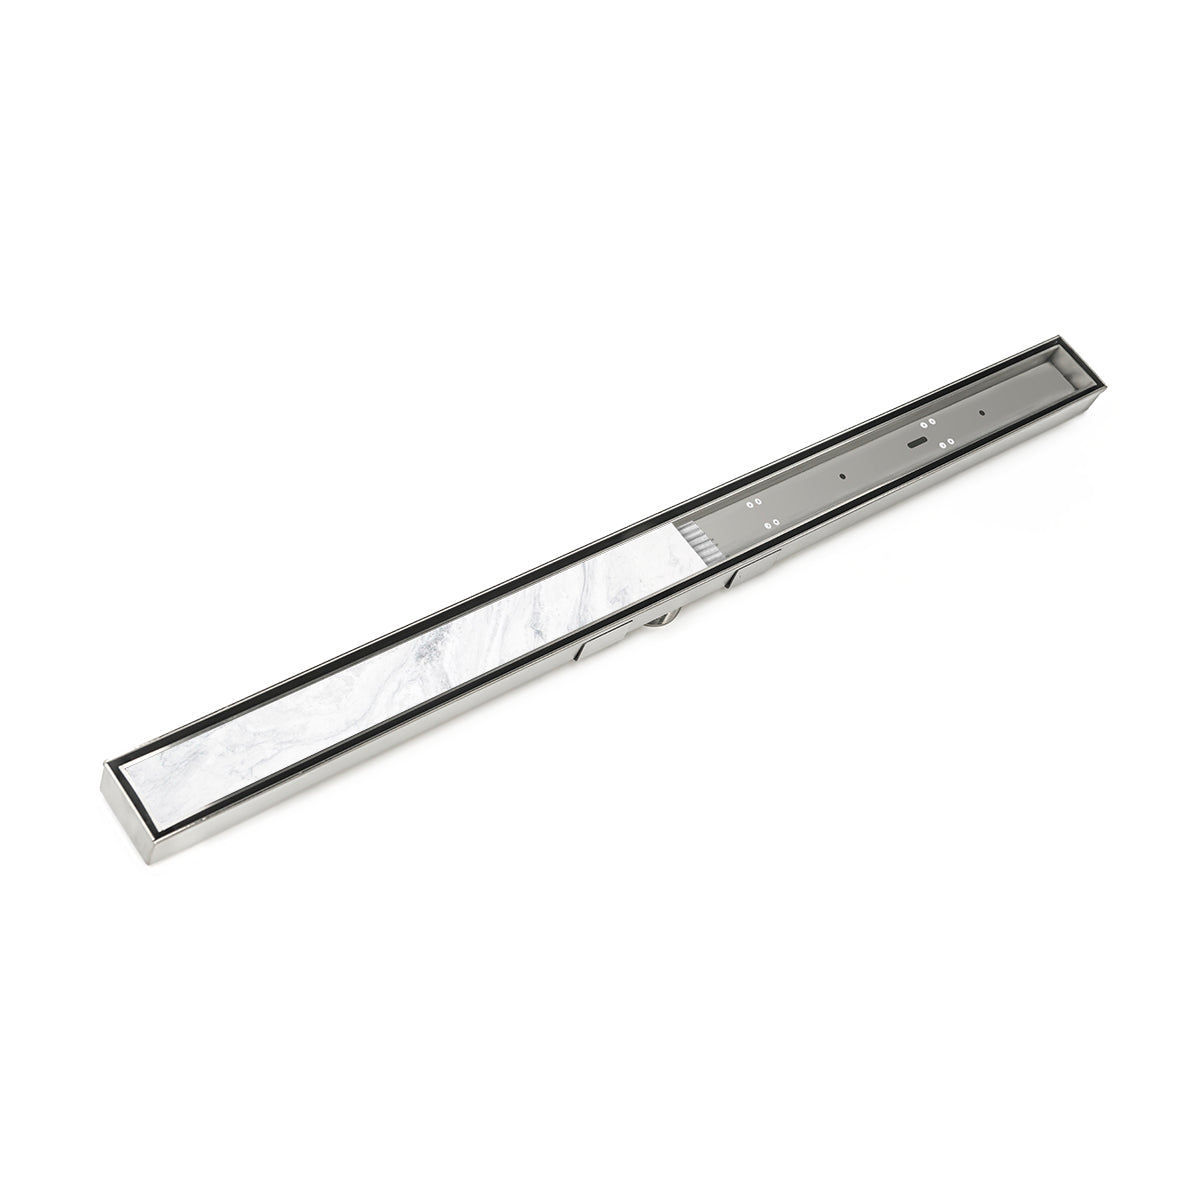 Infinity Drain 72" S-Stainless Steel Series High Flow Site Sizable Linear Drain Kit with Low Profile Tile Insert Frame with PVC Drain Body, 3" Outlet